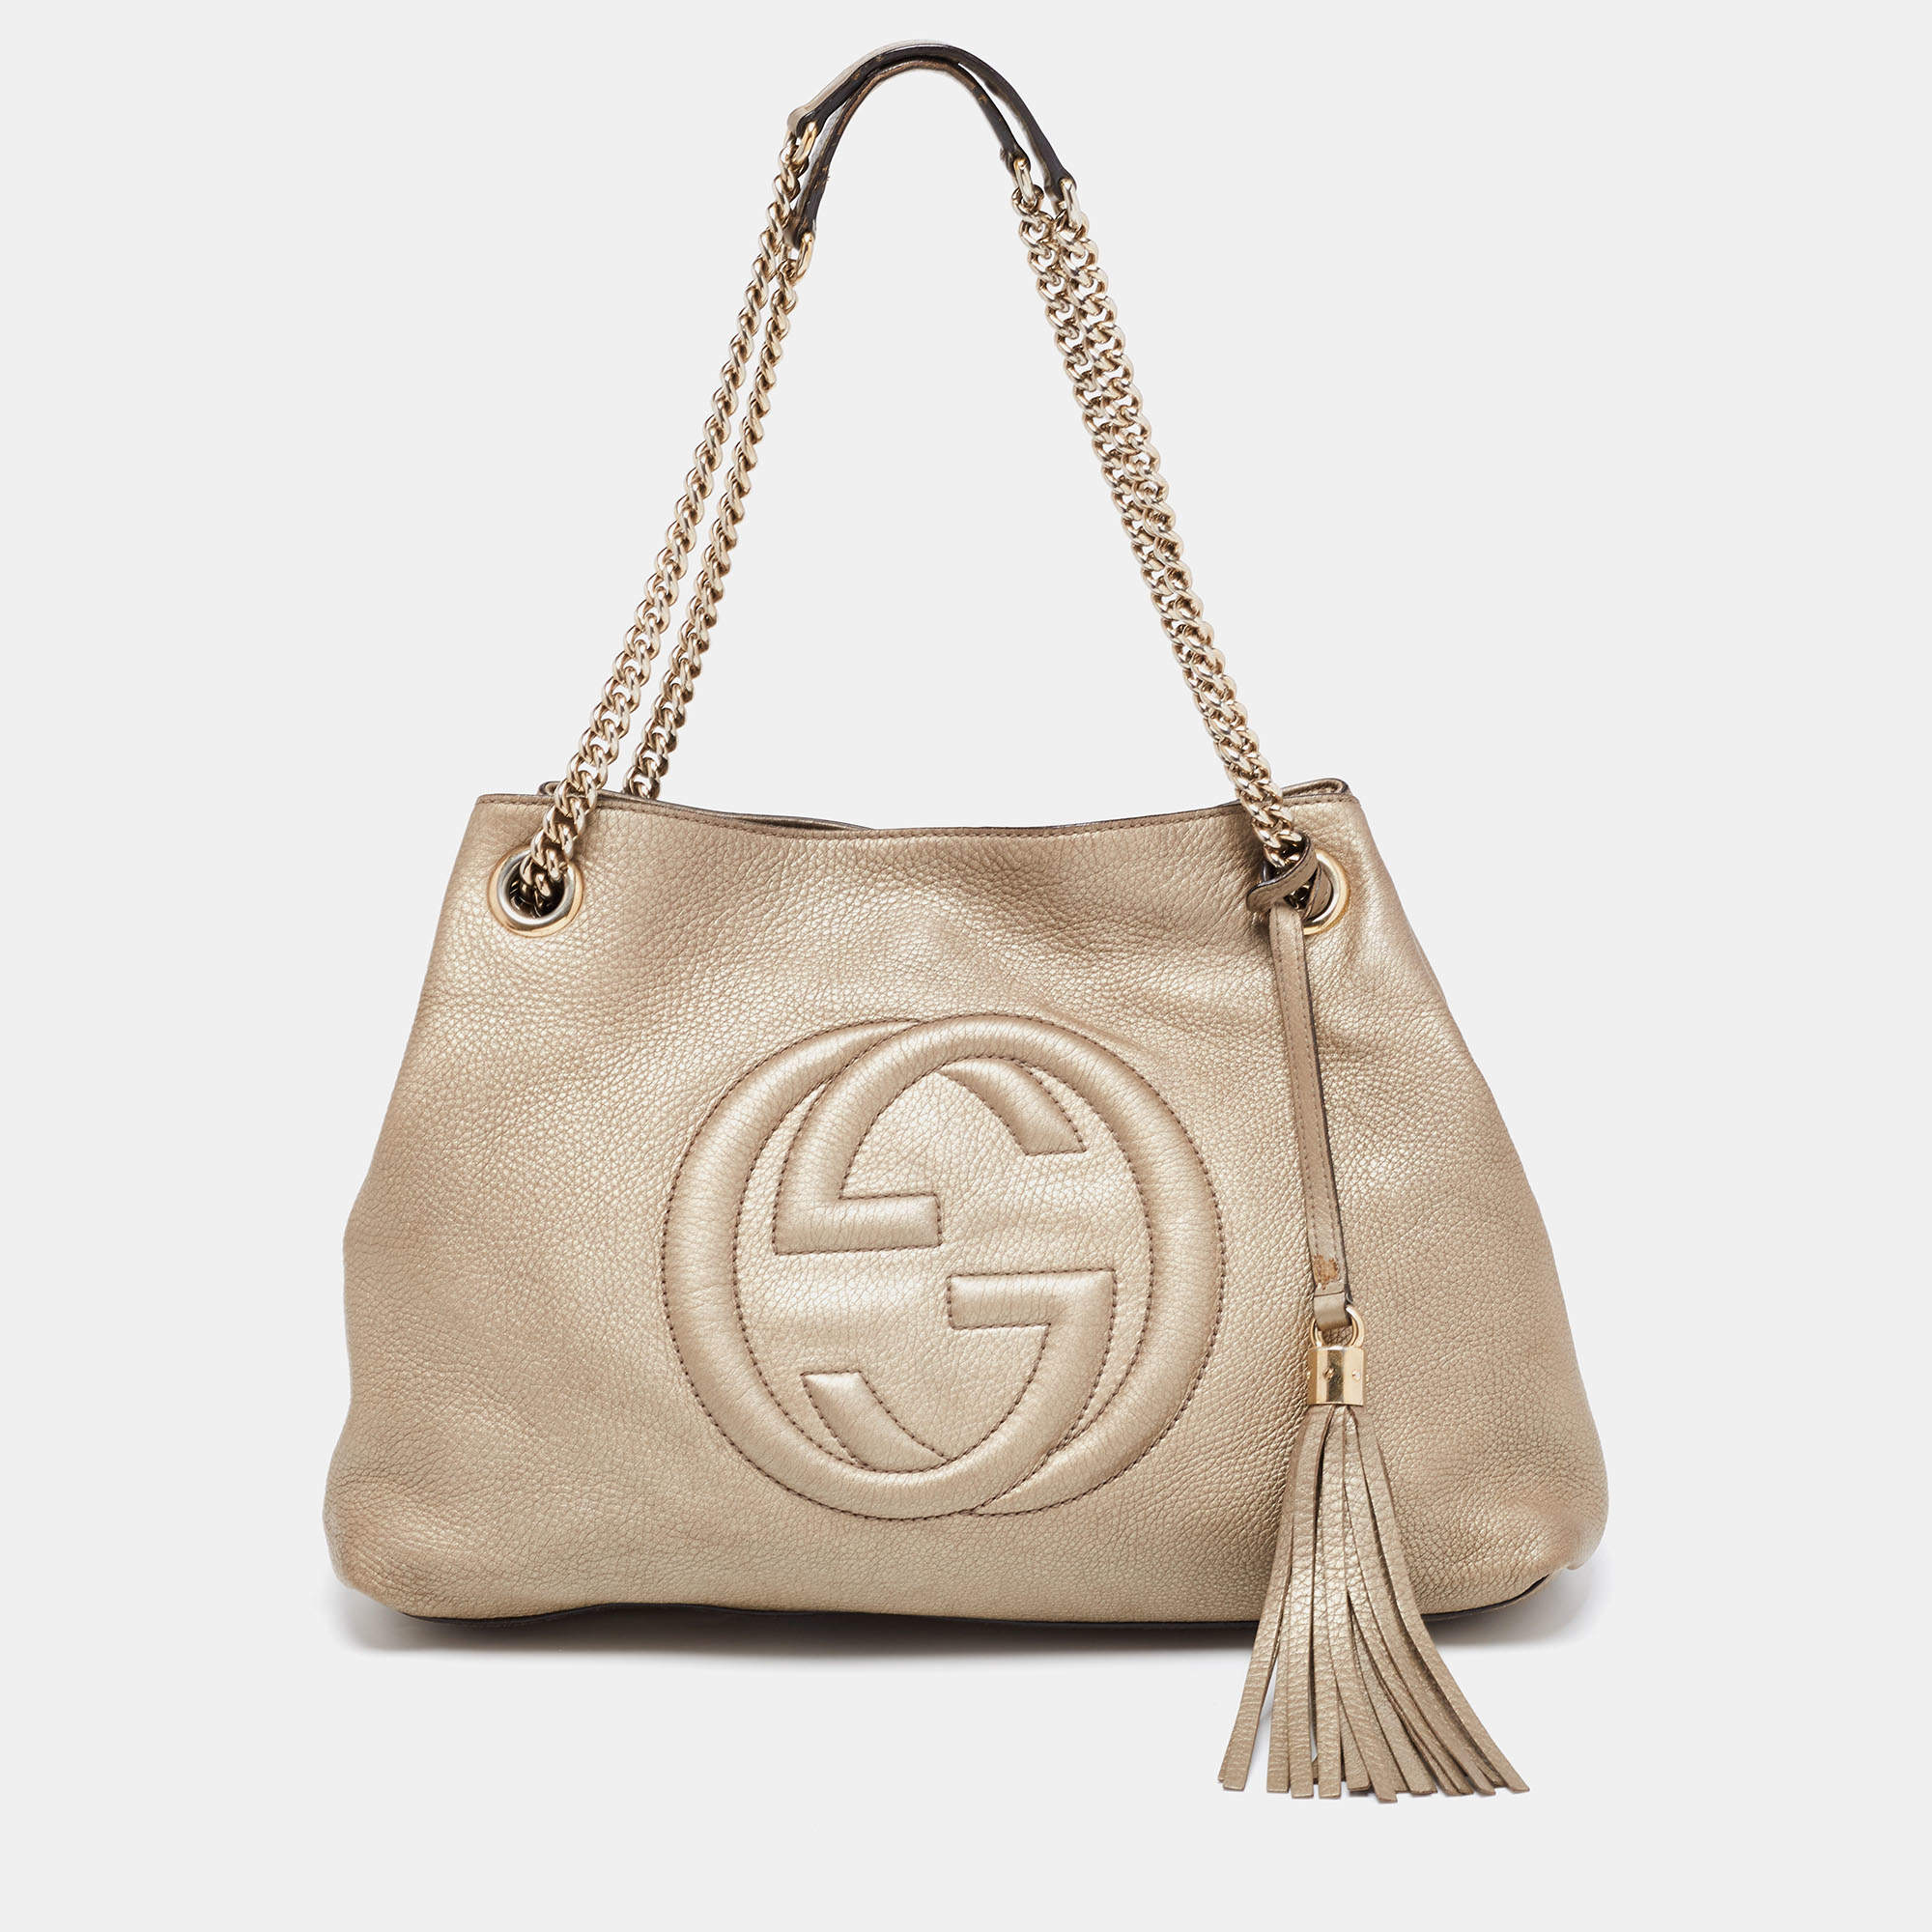 GUCCI Soho Red Gold Chain Shoulder Bag leather Tote Double G Gucci Logo